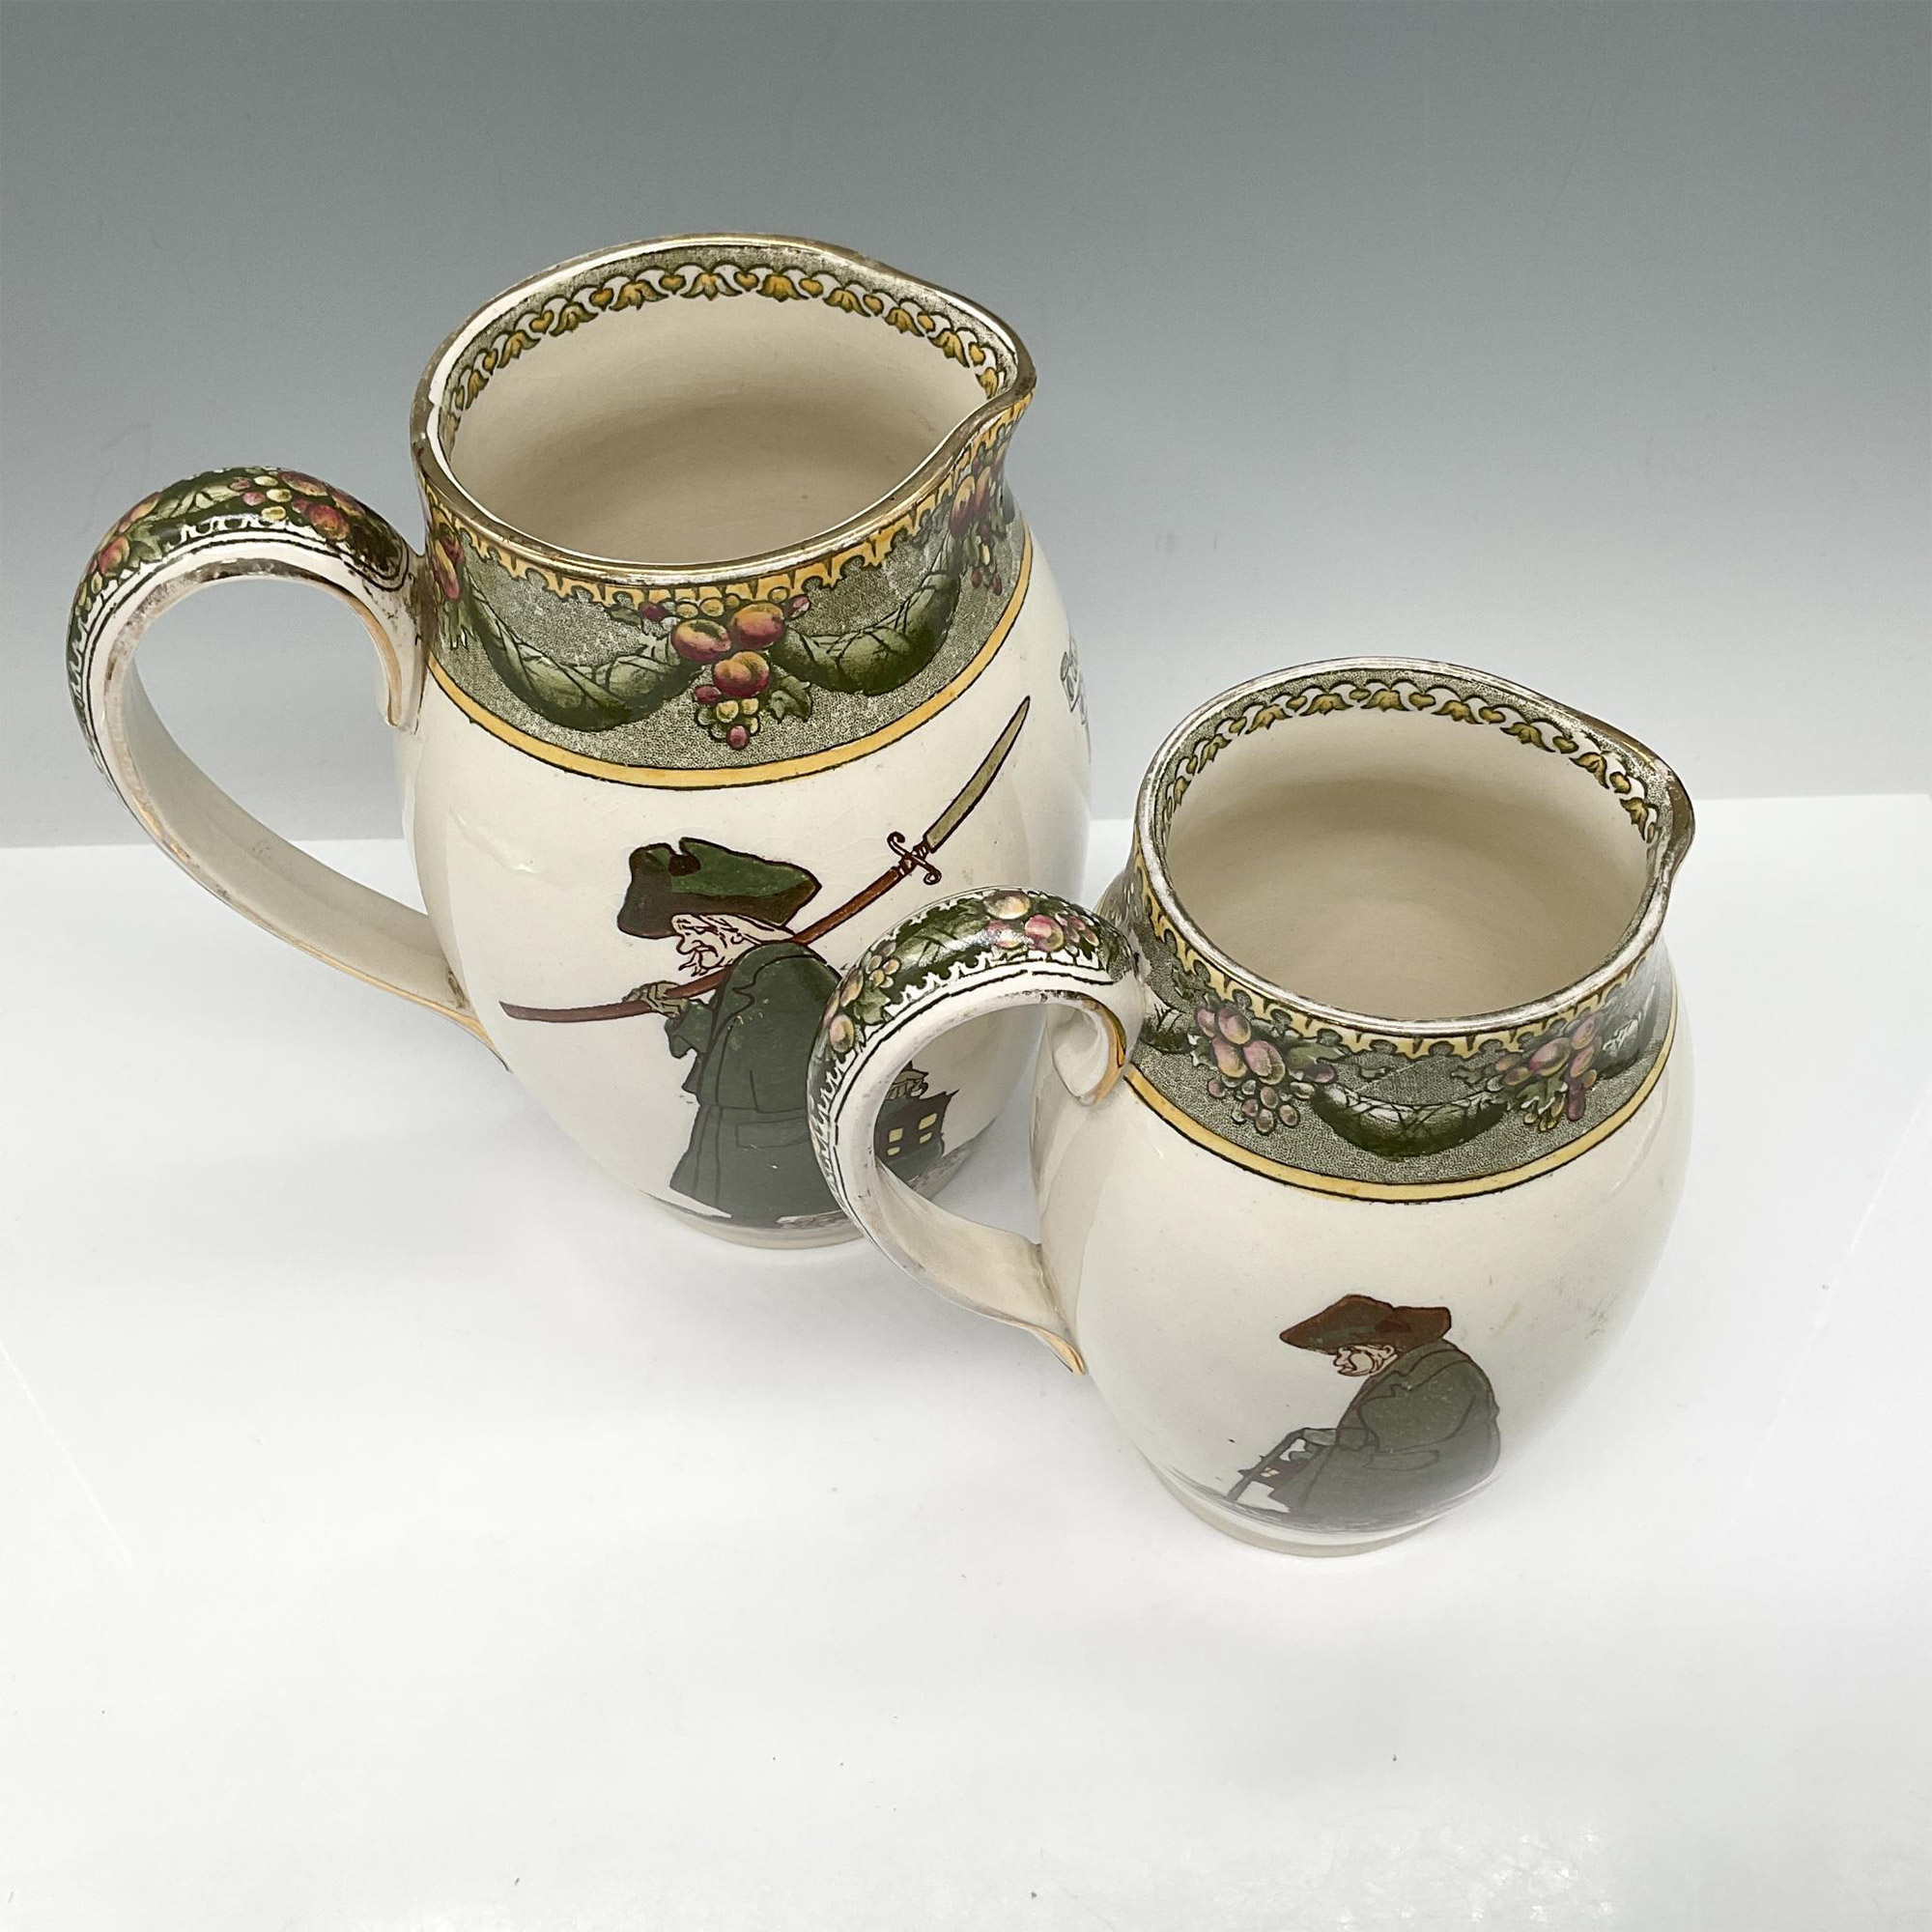 2pc Royal Doulton Series Ware, Night Watchman Pitchers - Image 3 of 4